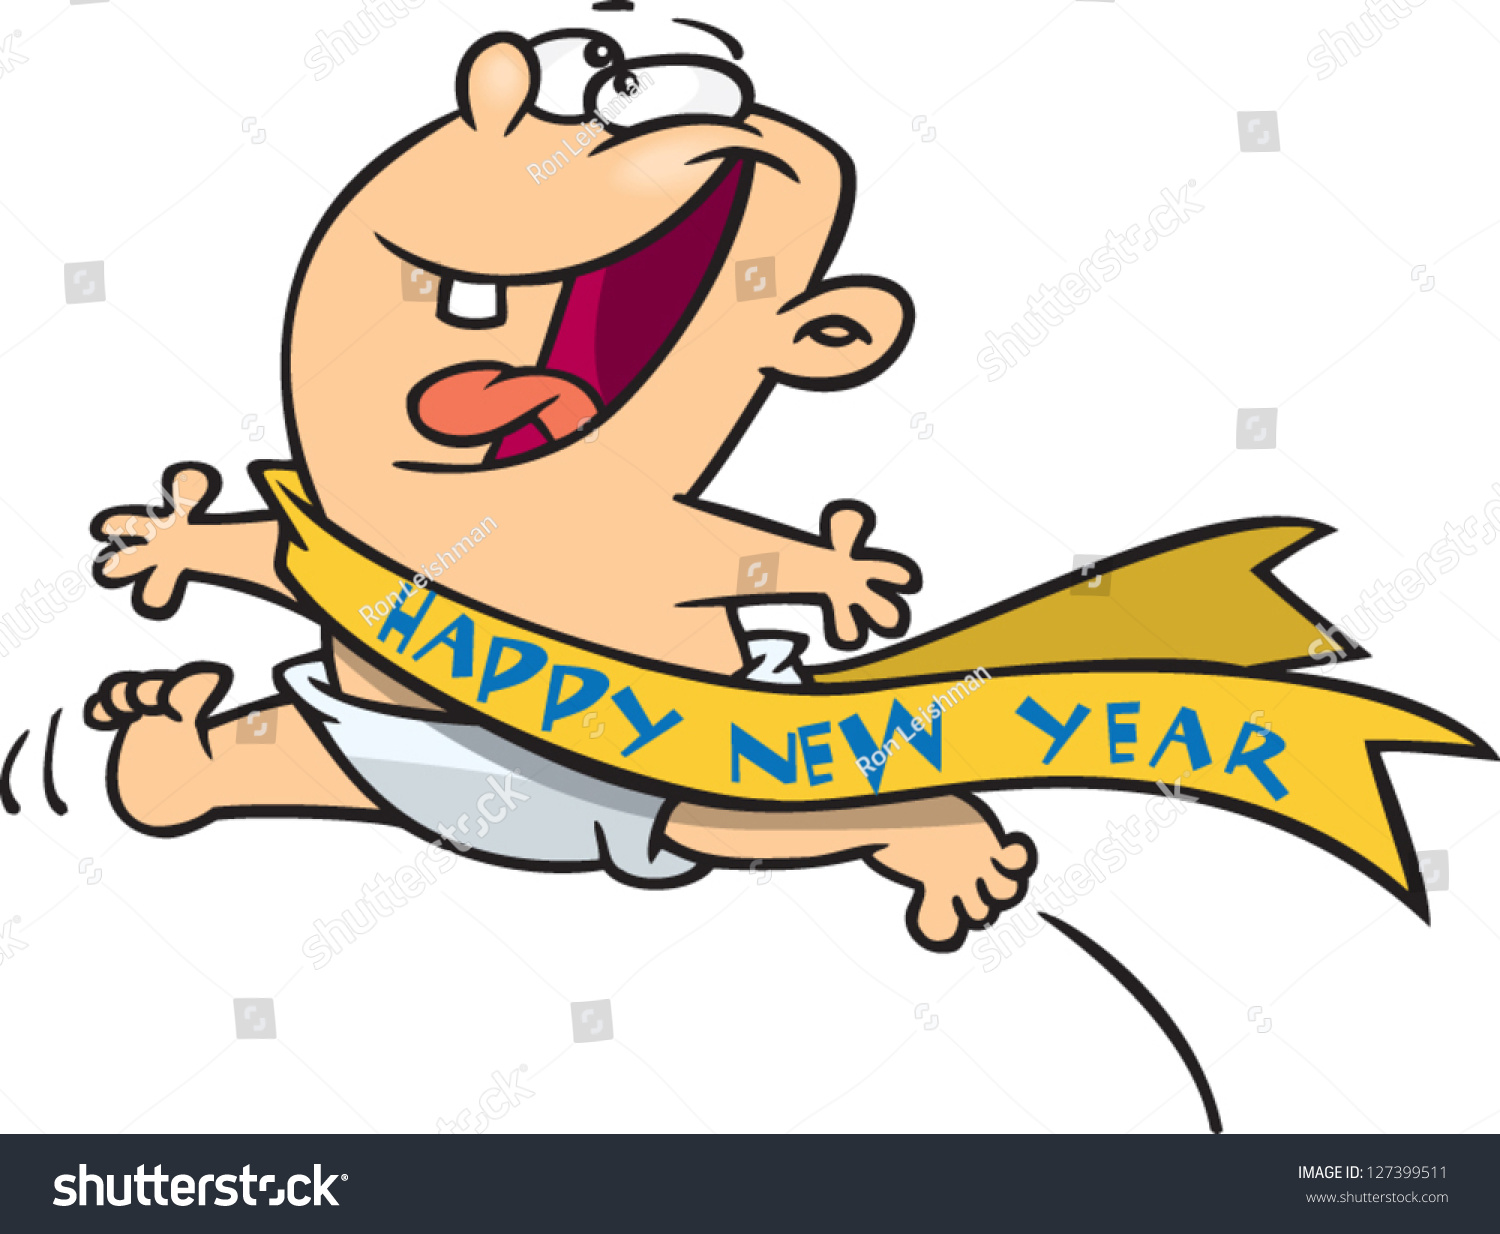 A Vector Illustration Of Cartoon New Year Baby Wearing A ...